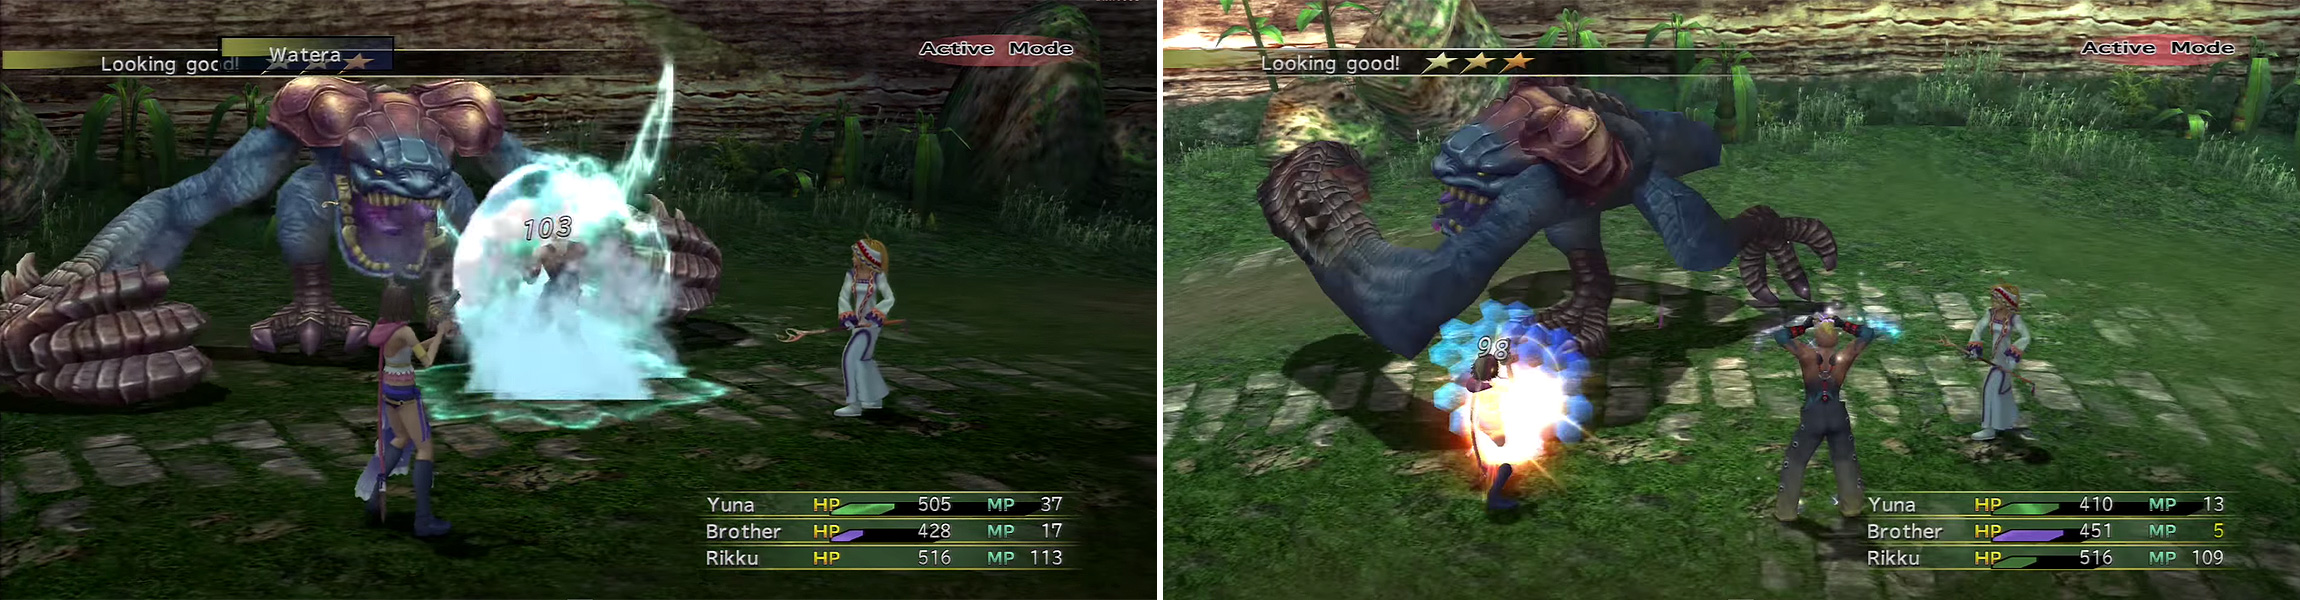 The Chocobo Eater uses second tier spells like Watera (left) and a basic physical attack which you can guard with Protect (right).